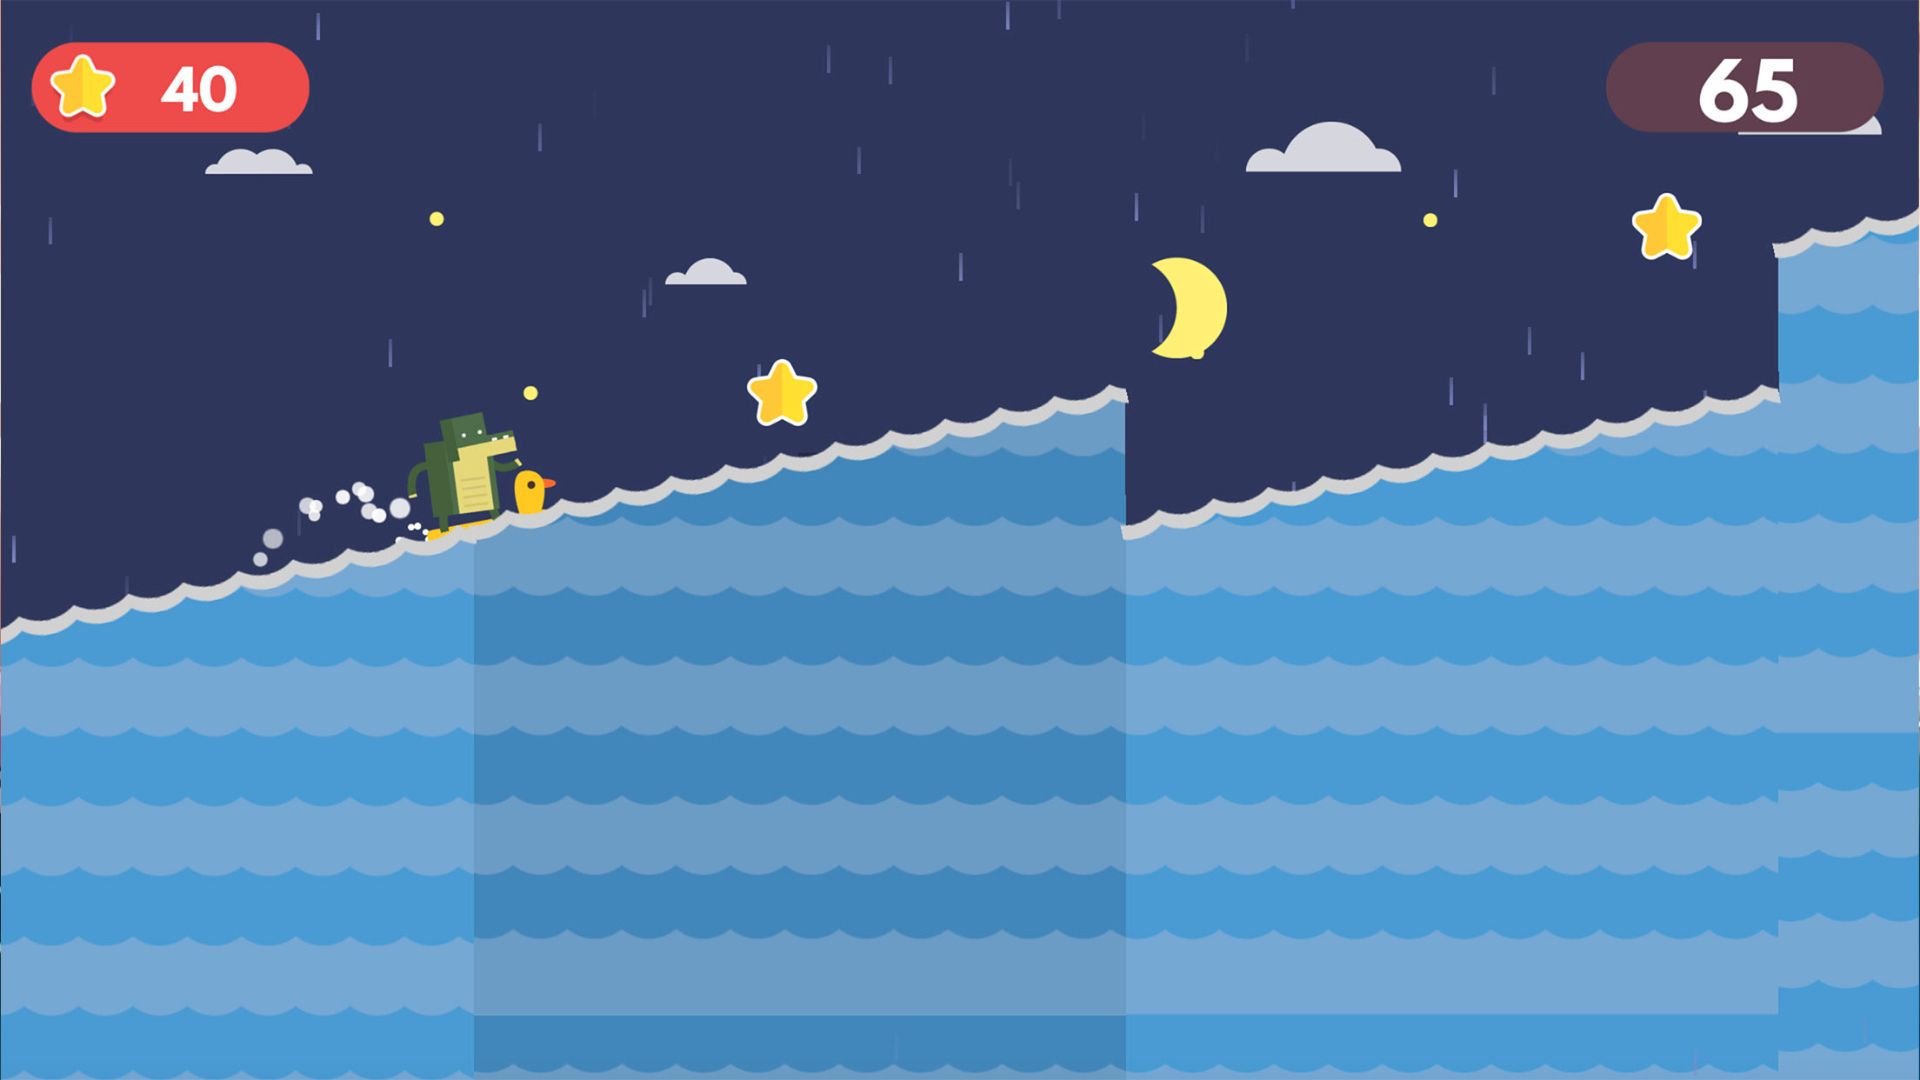 Surfing games - a crocodile glides up a wave in a 2d screenshot.